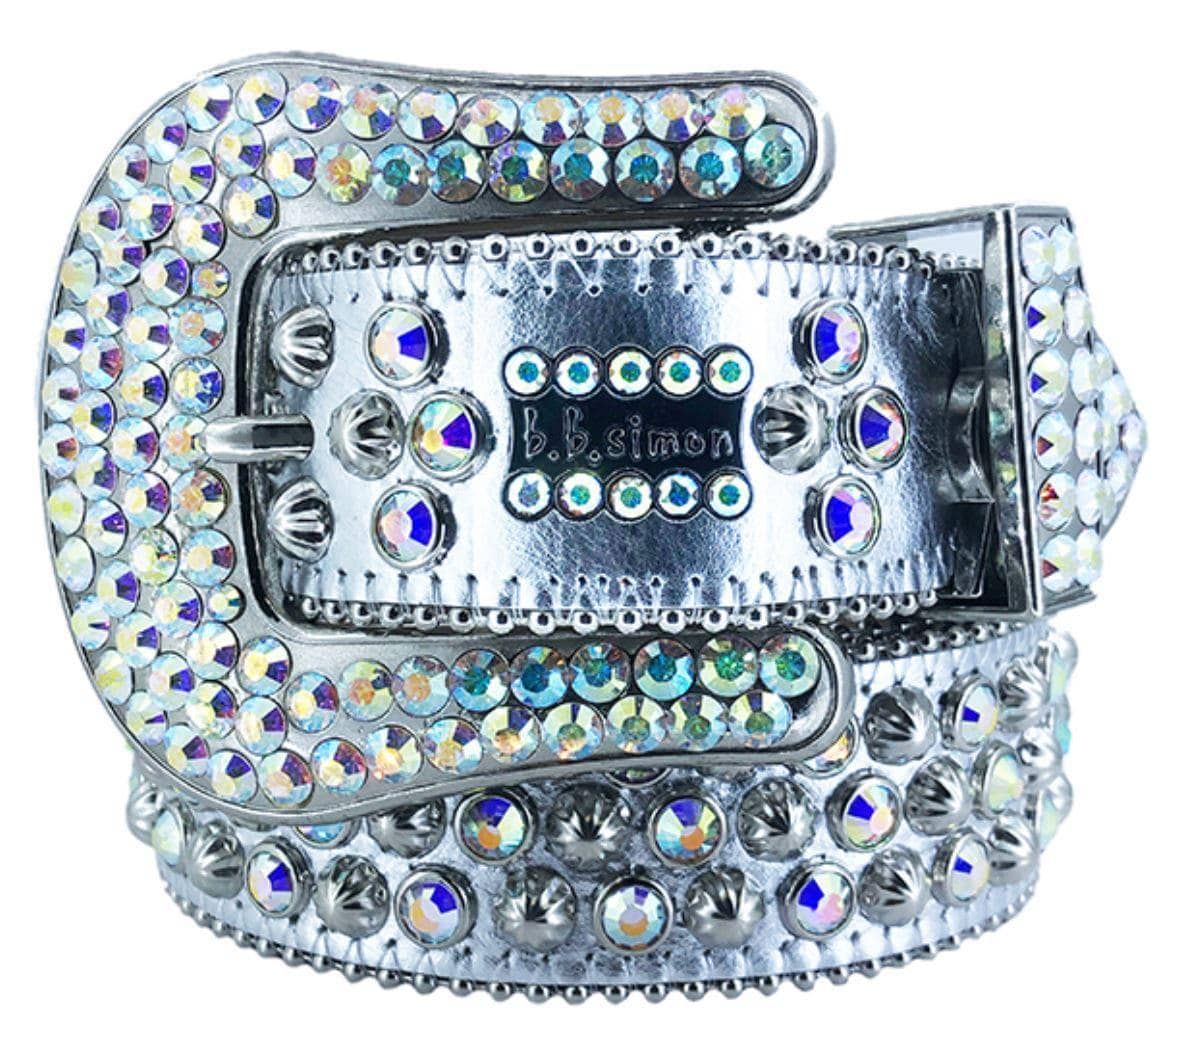 BB Simon Silver Leather with Crystals Belt - Amore Accessories